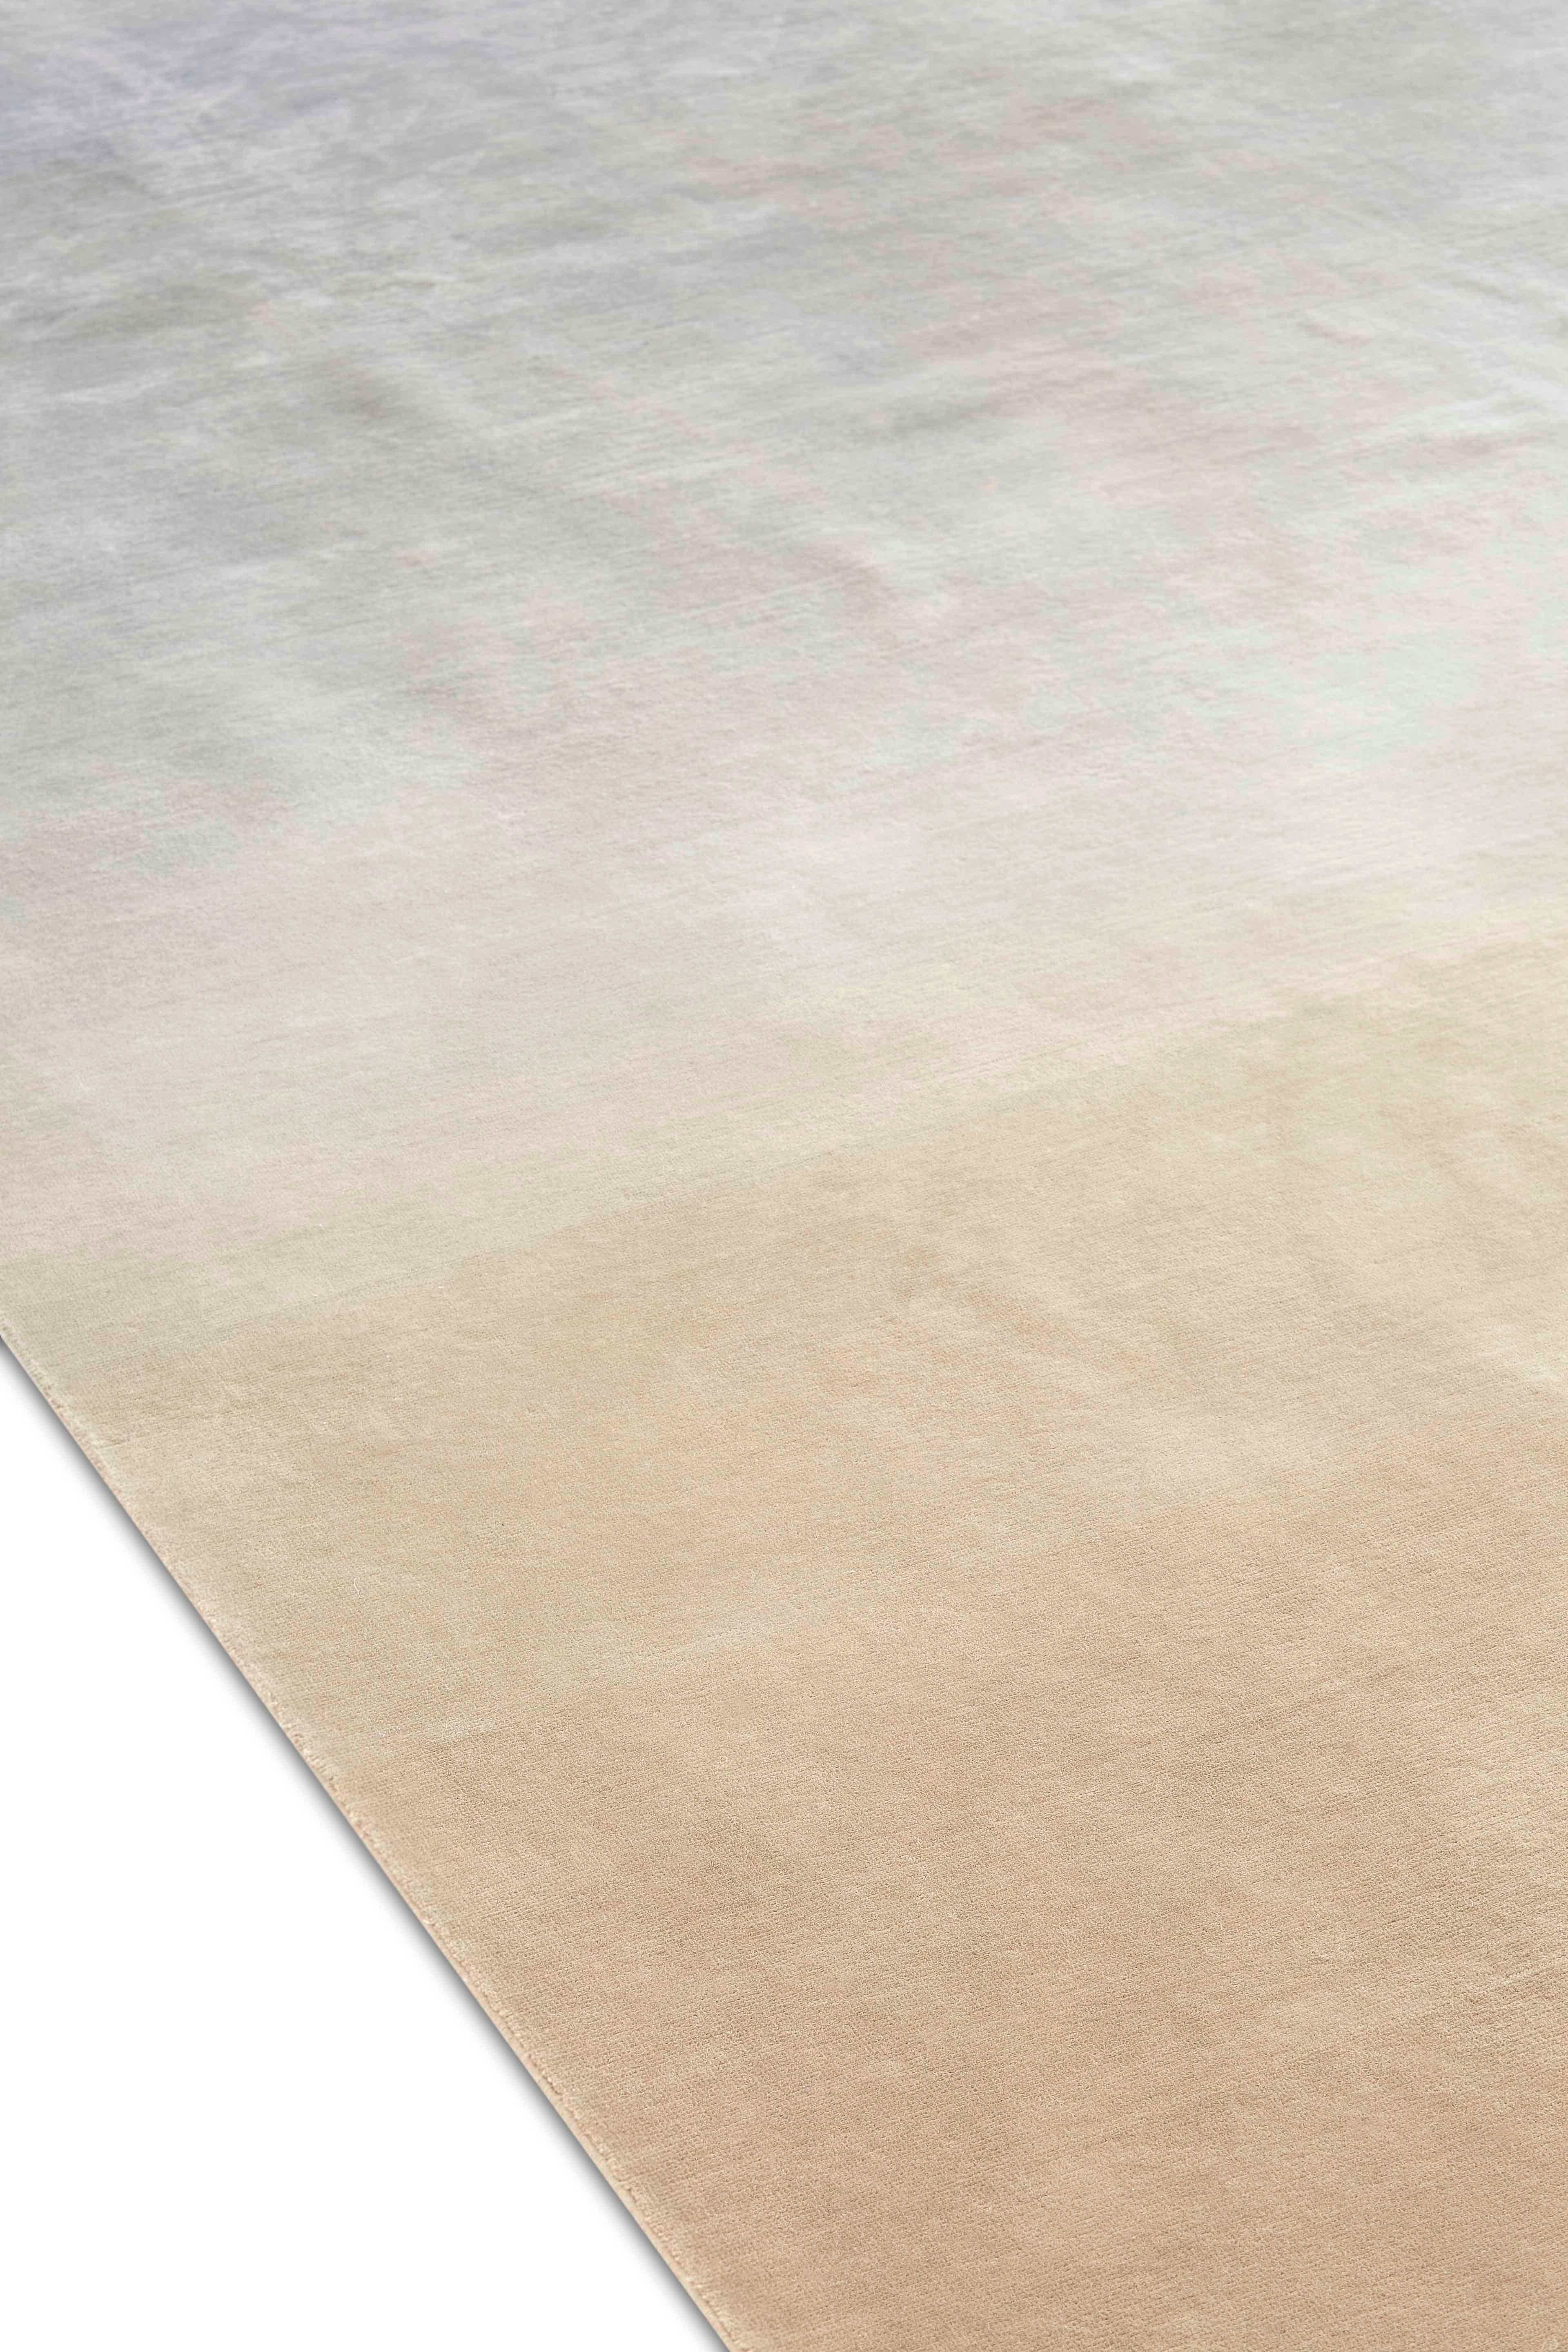 Degrade is the latest contribution by Patricia Urquiola to GAN’s collection of hand-knotted rugs. Sober and elegant, these rugs play with color and intermediate tones, demonstrating the expertise that characterizes the designer. The new Degrade rugs